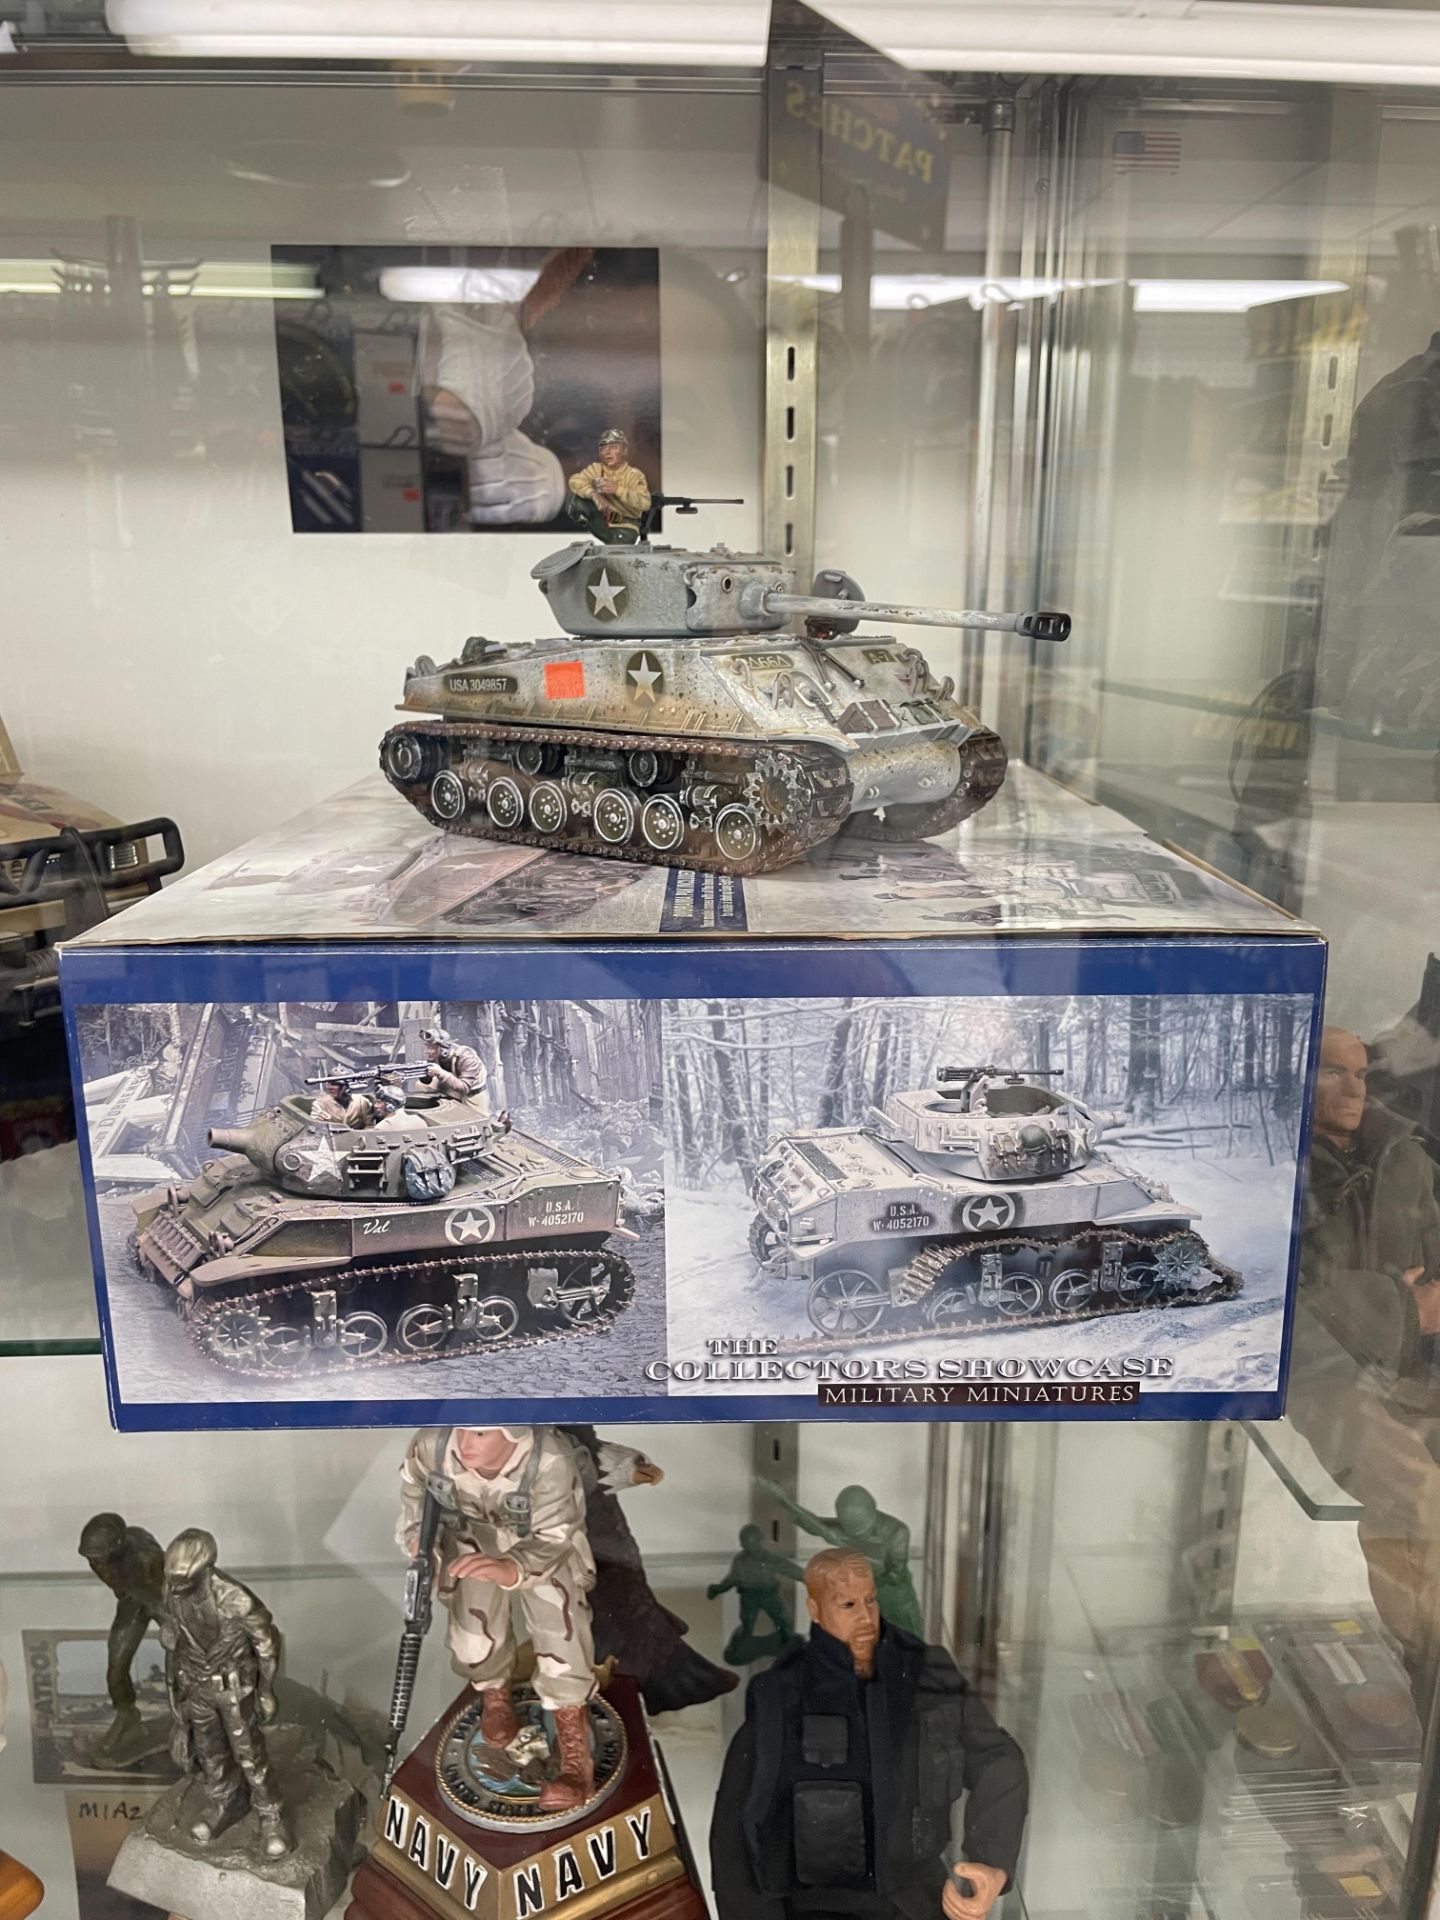 Collectors Showcase Military Miniatures Fully Assembled Model Sherman Tank w/ Box